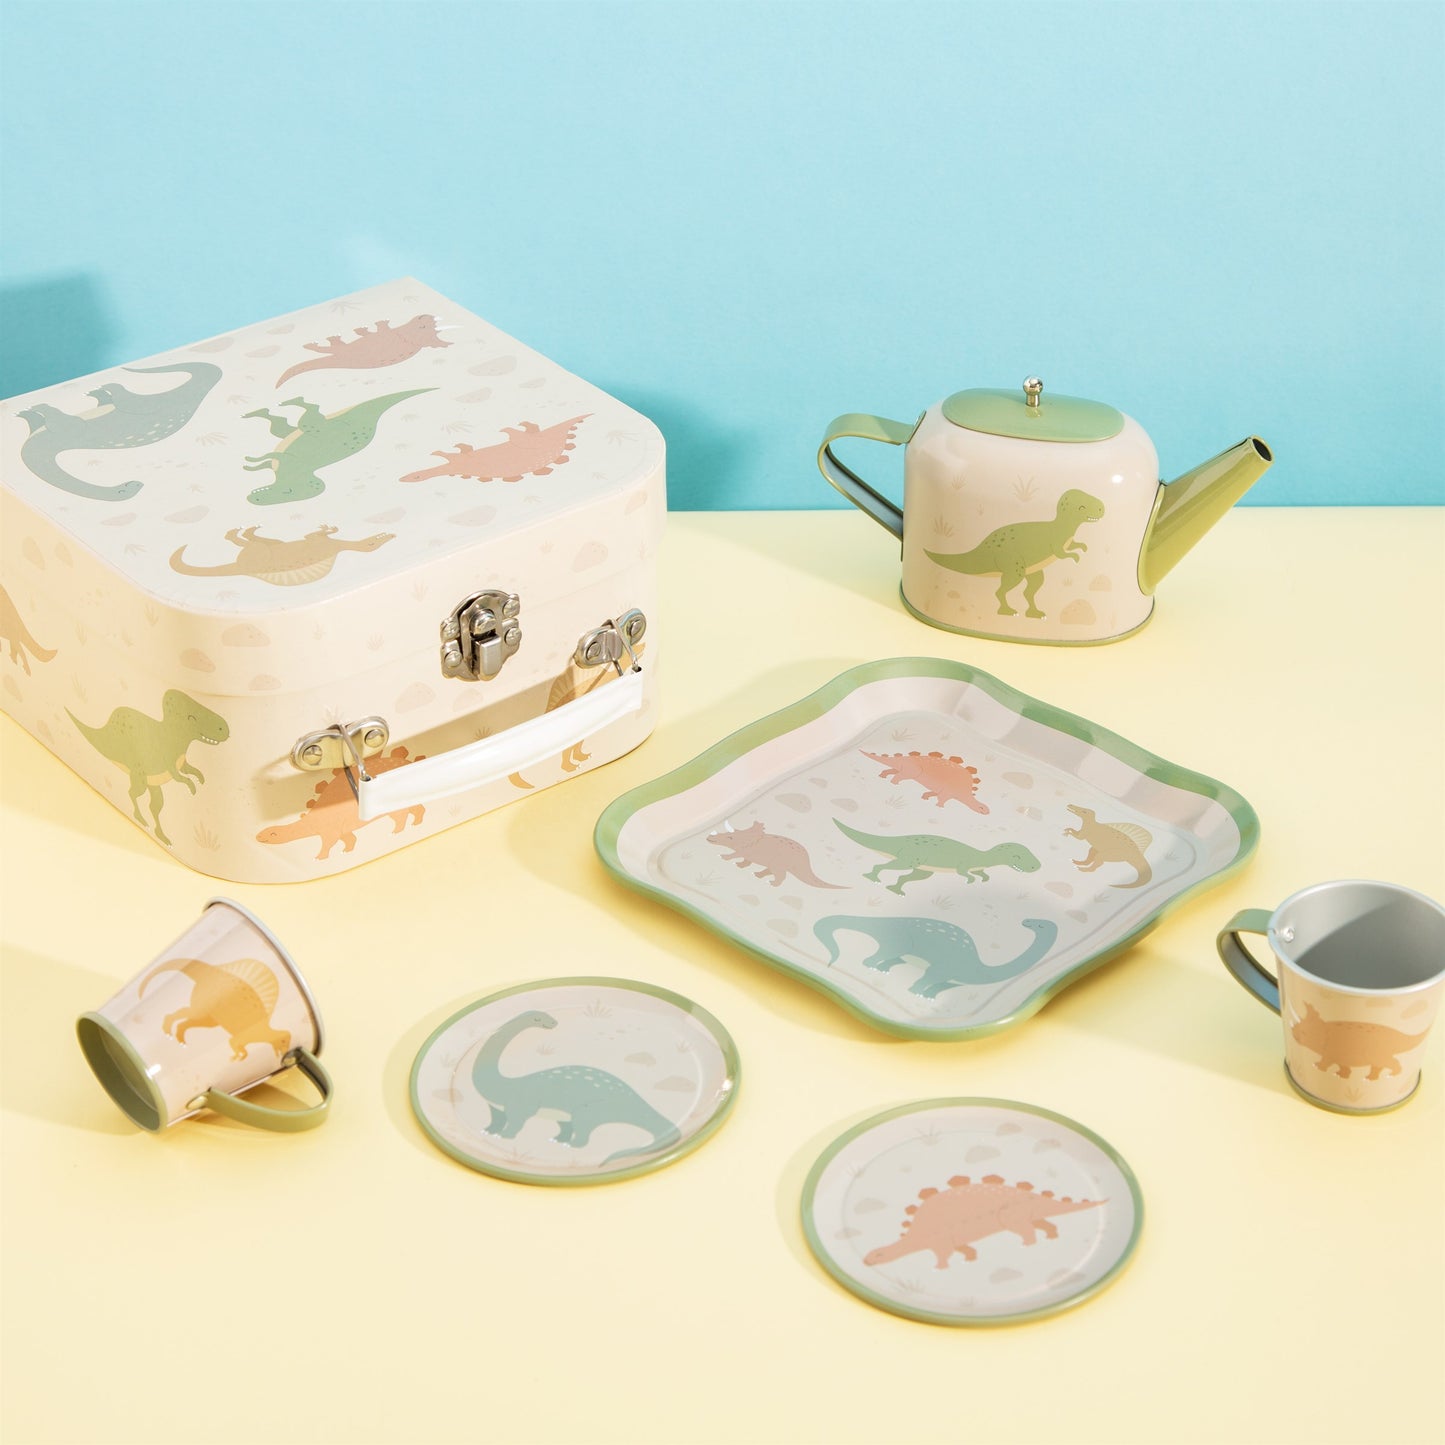 Desert Dino Kids' Tea for Two Set by Sass and Belle